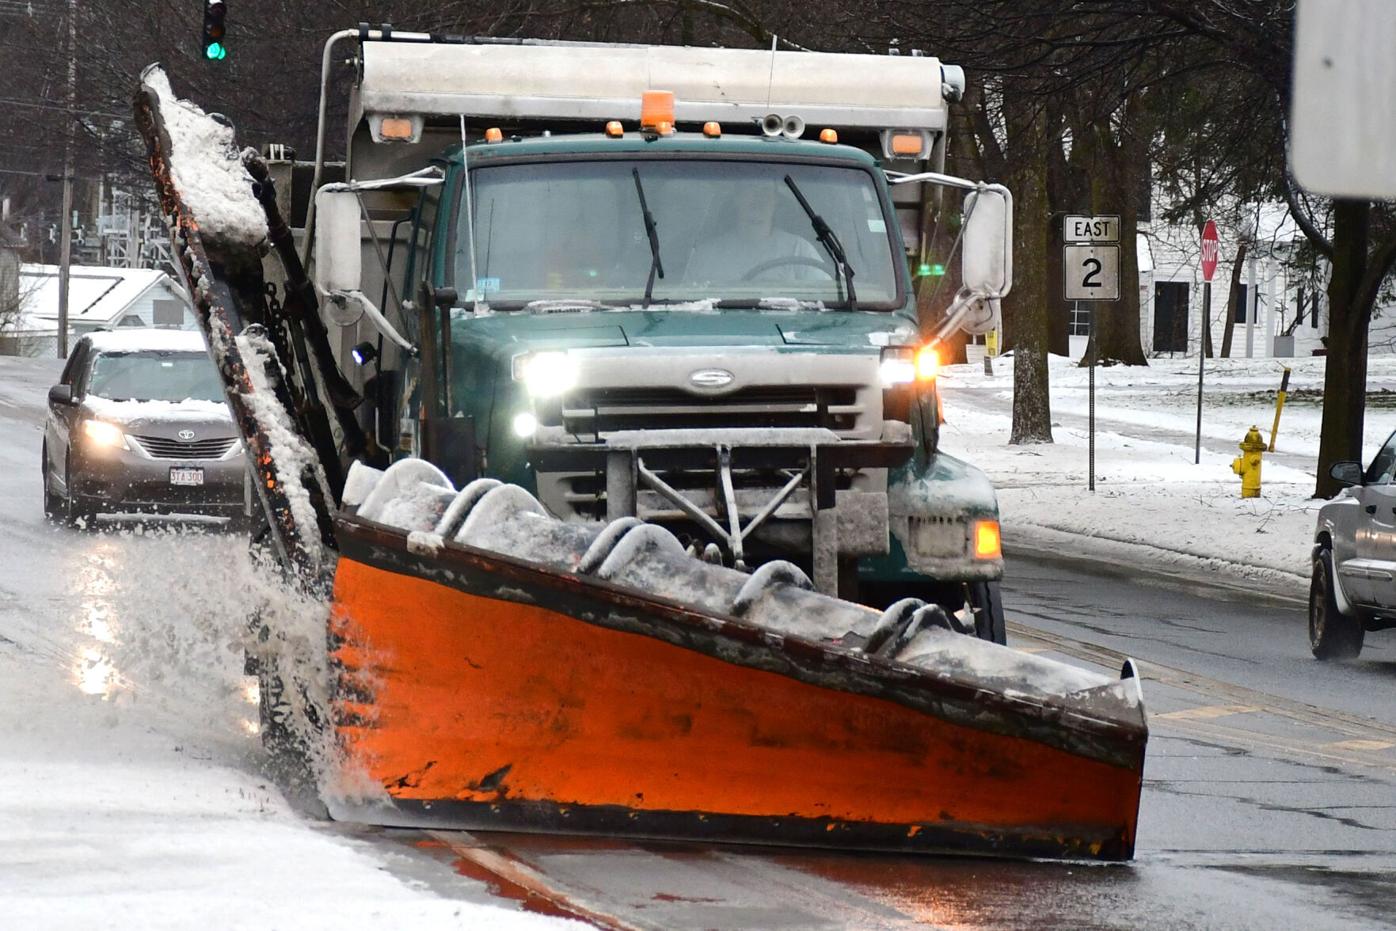 A snowplow clears wet snow